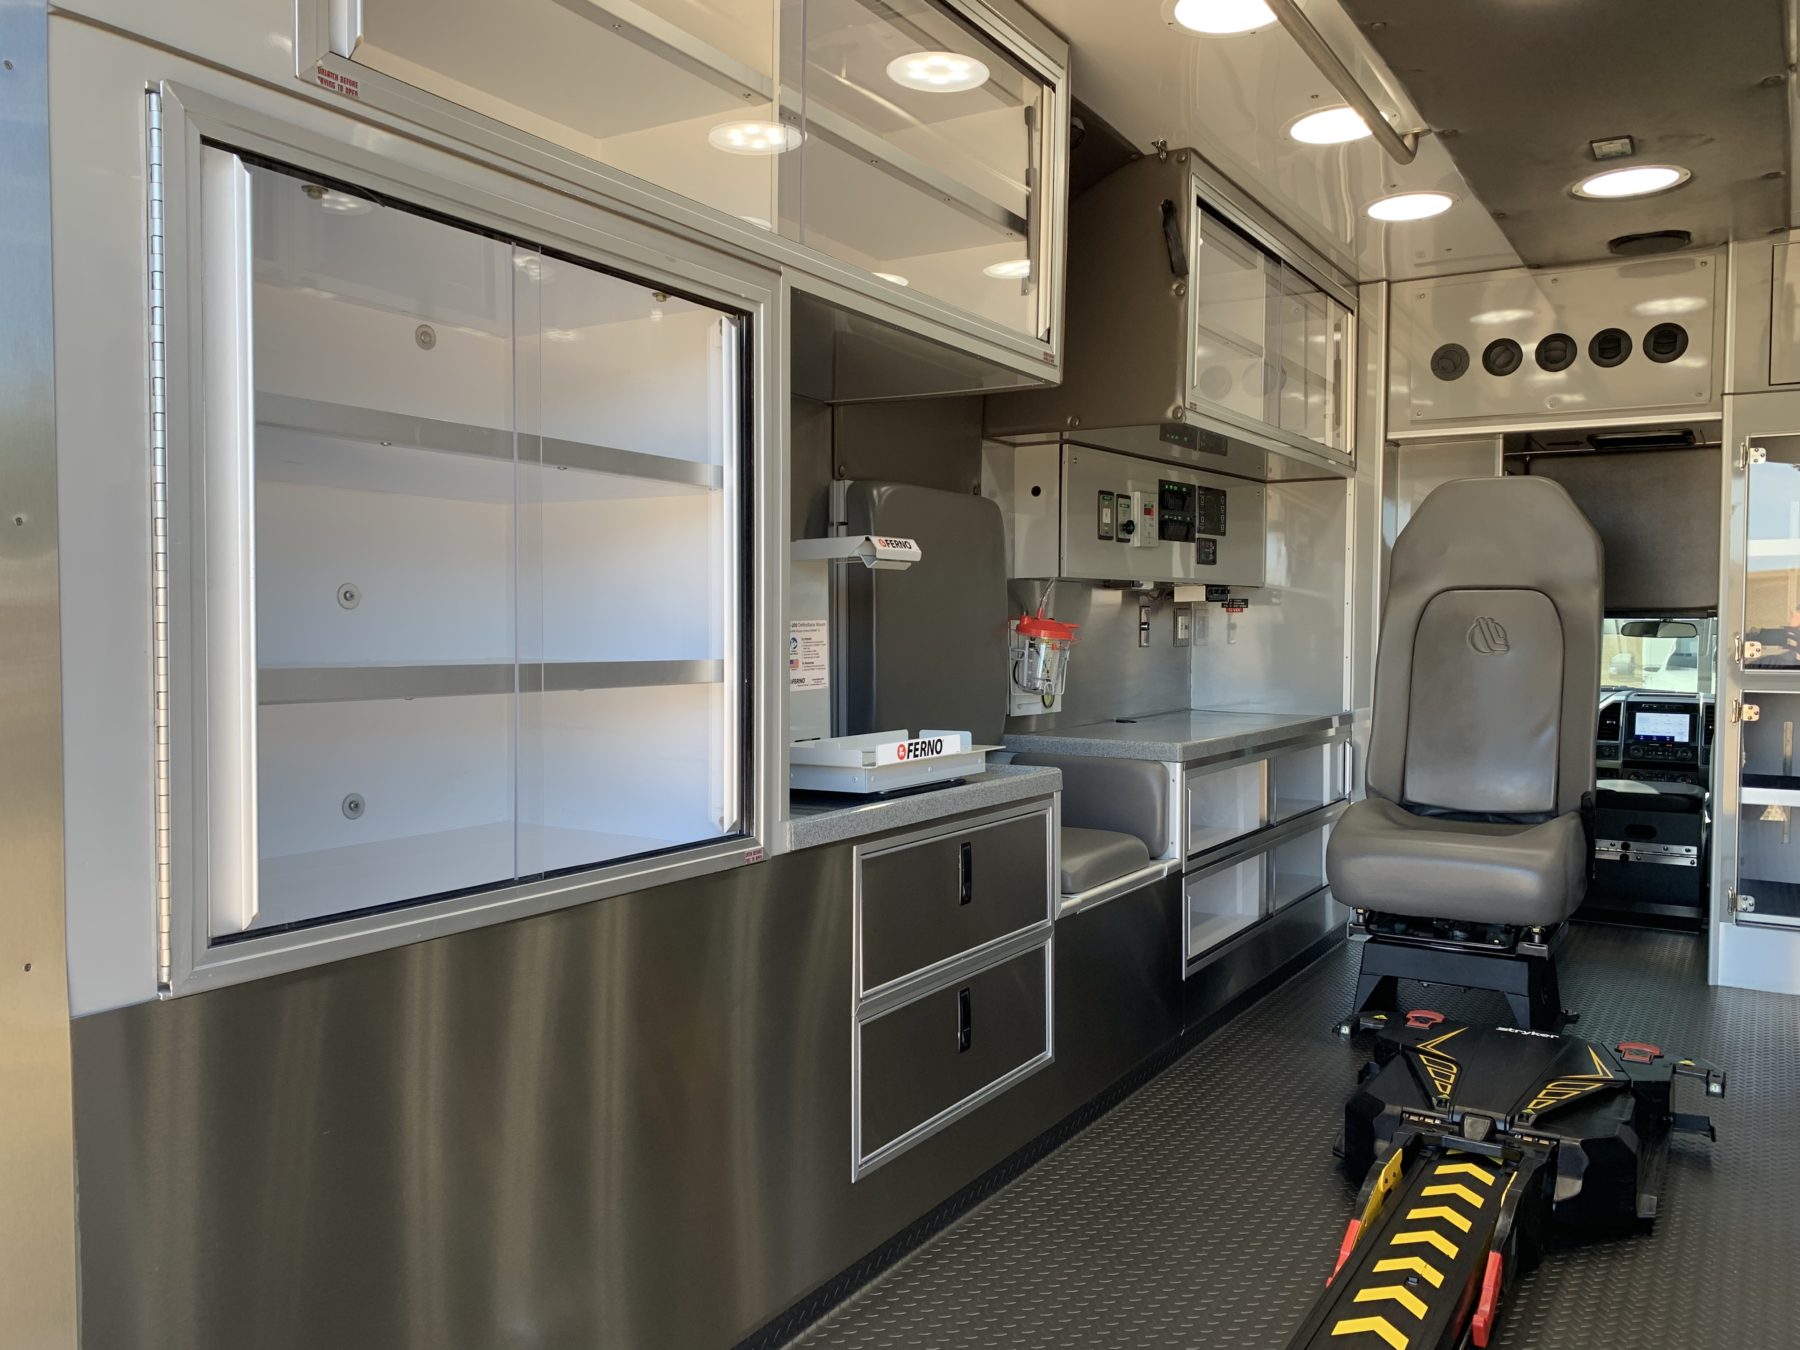 2021 Ford F550 4x4 Heavy Duty Ambulance For Sale – Picture 11